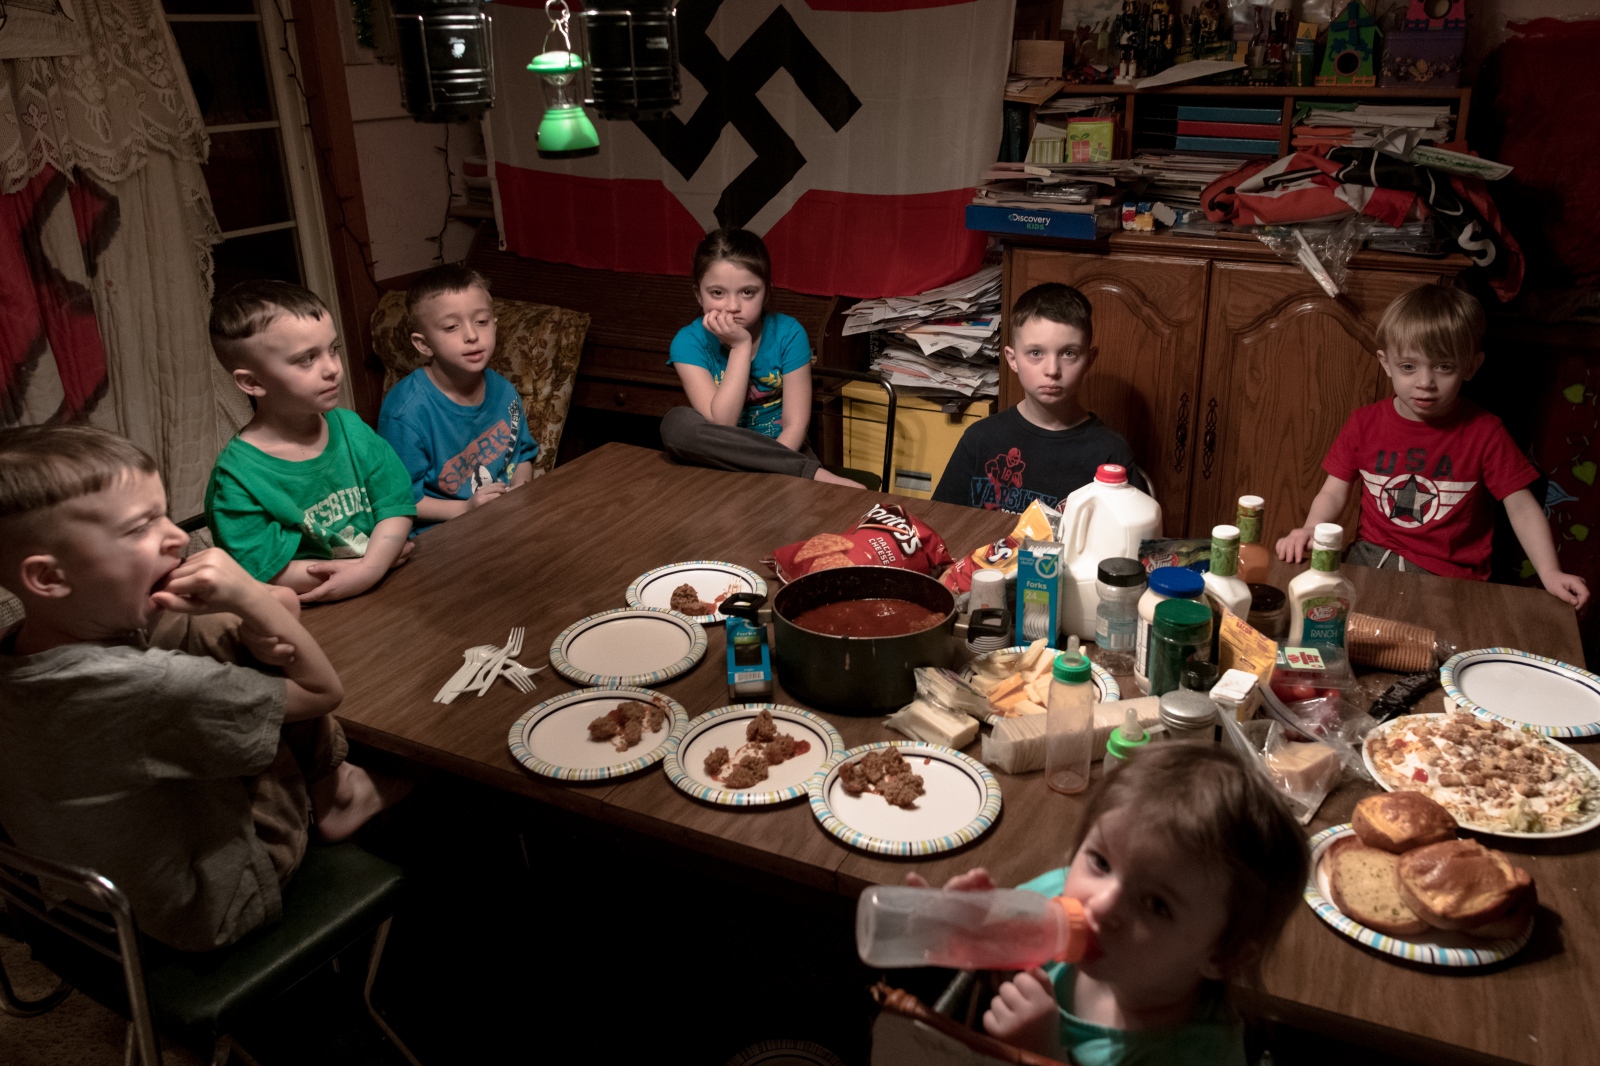 2/24/2018. Dinnertime at the home of White Nationalist family. 